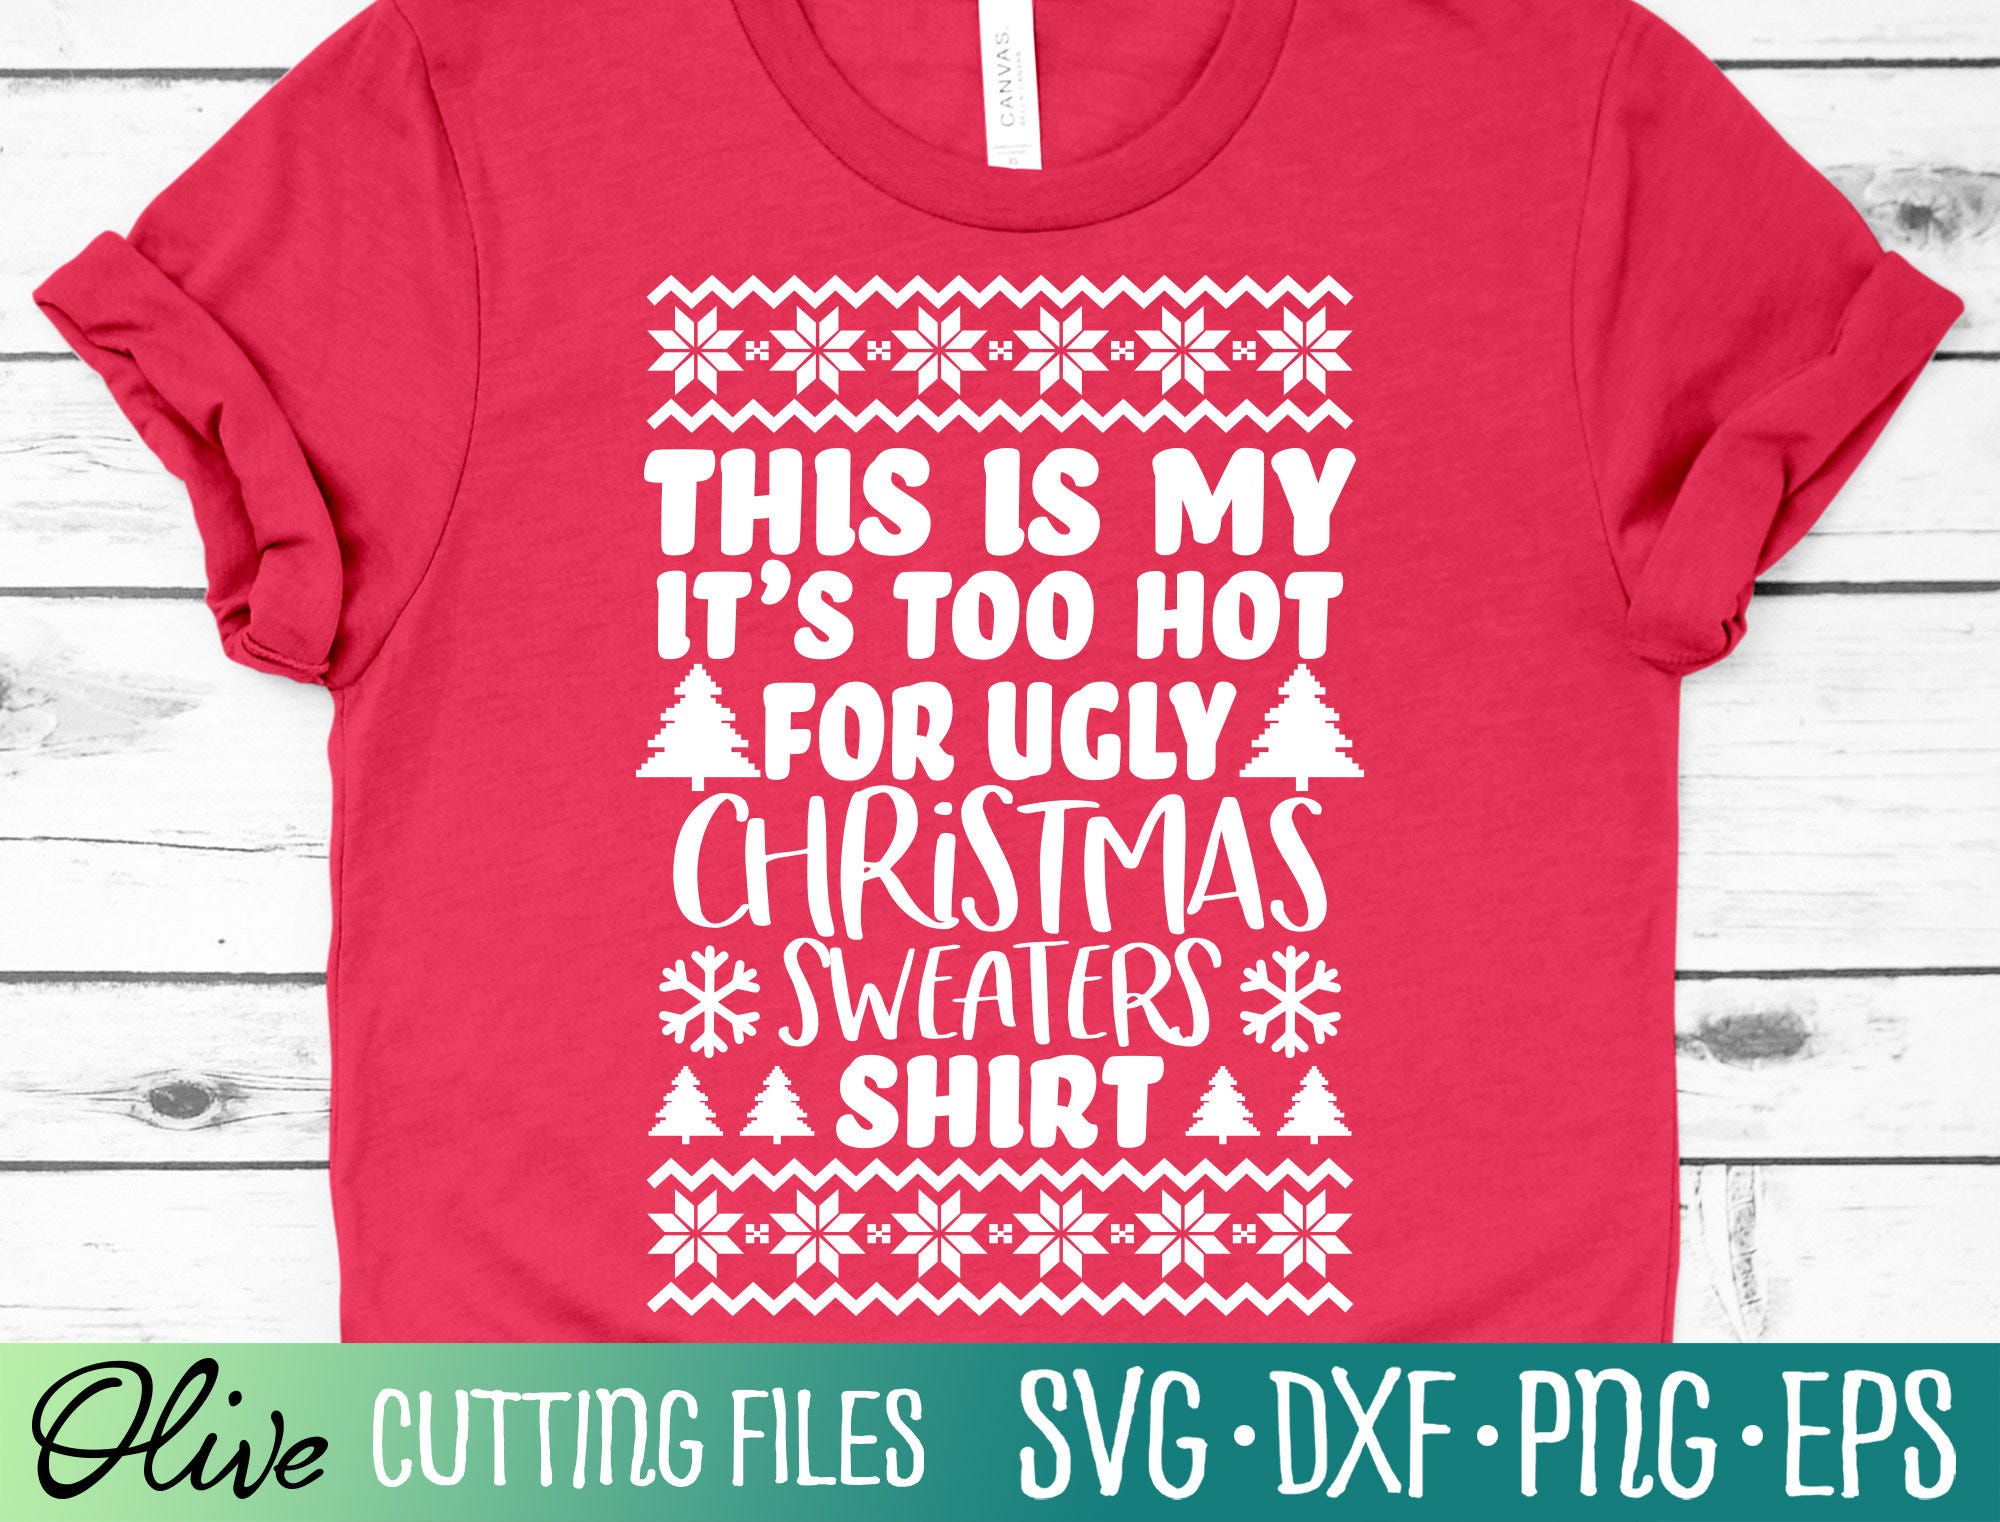 Funny Christmas Shirt Svg, Funny Holiday Svg, Ugly Christmas Sweater Svg, Christmas Sweater, Cameo Cricut, Cut File, Silhouette, Cricut